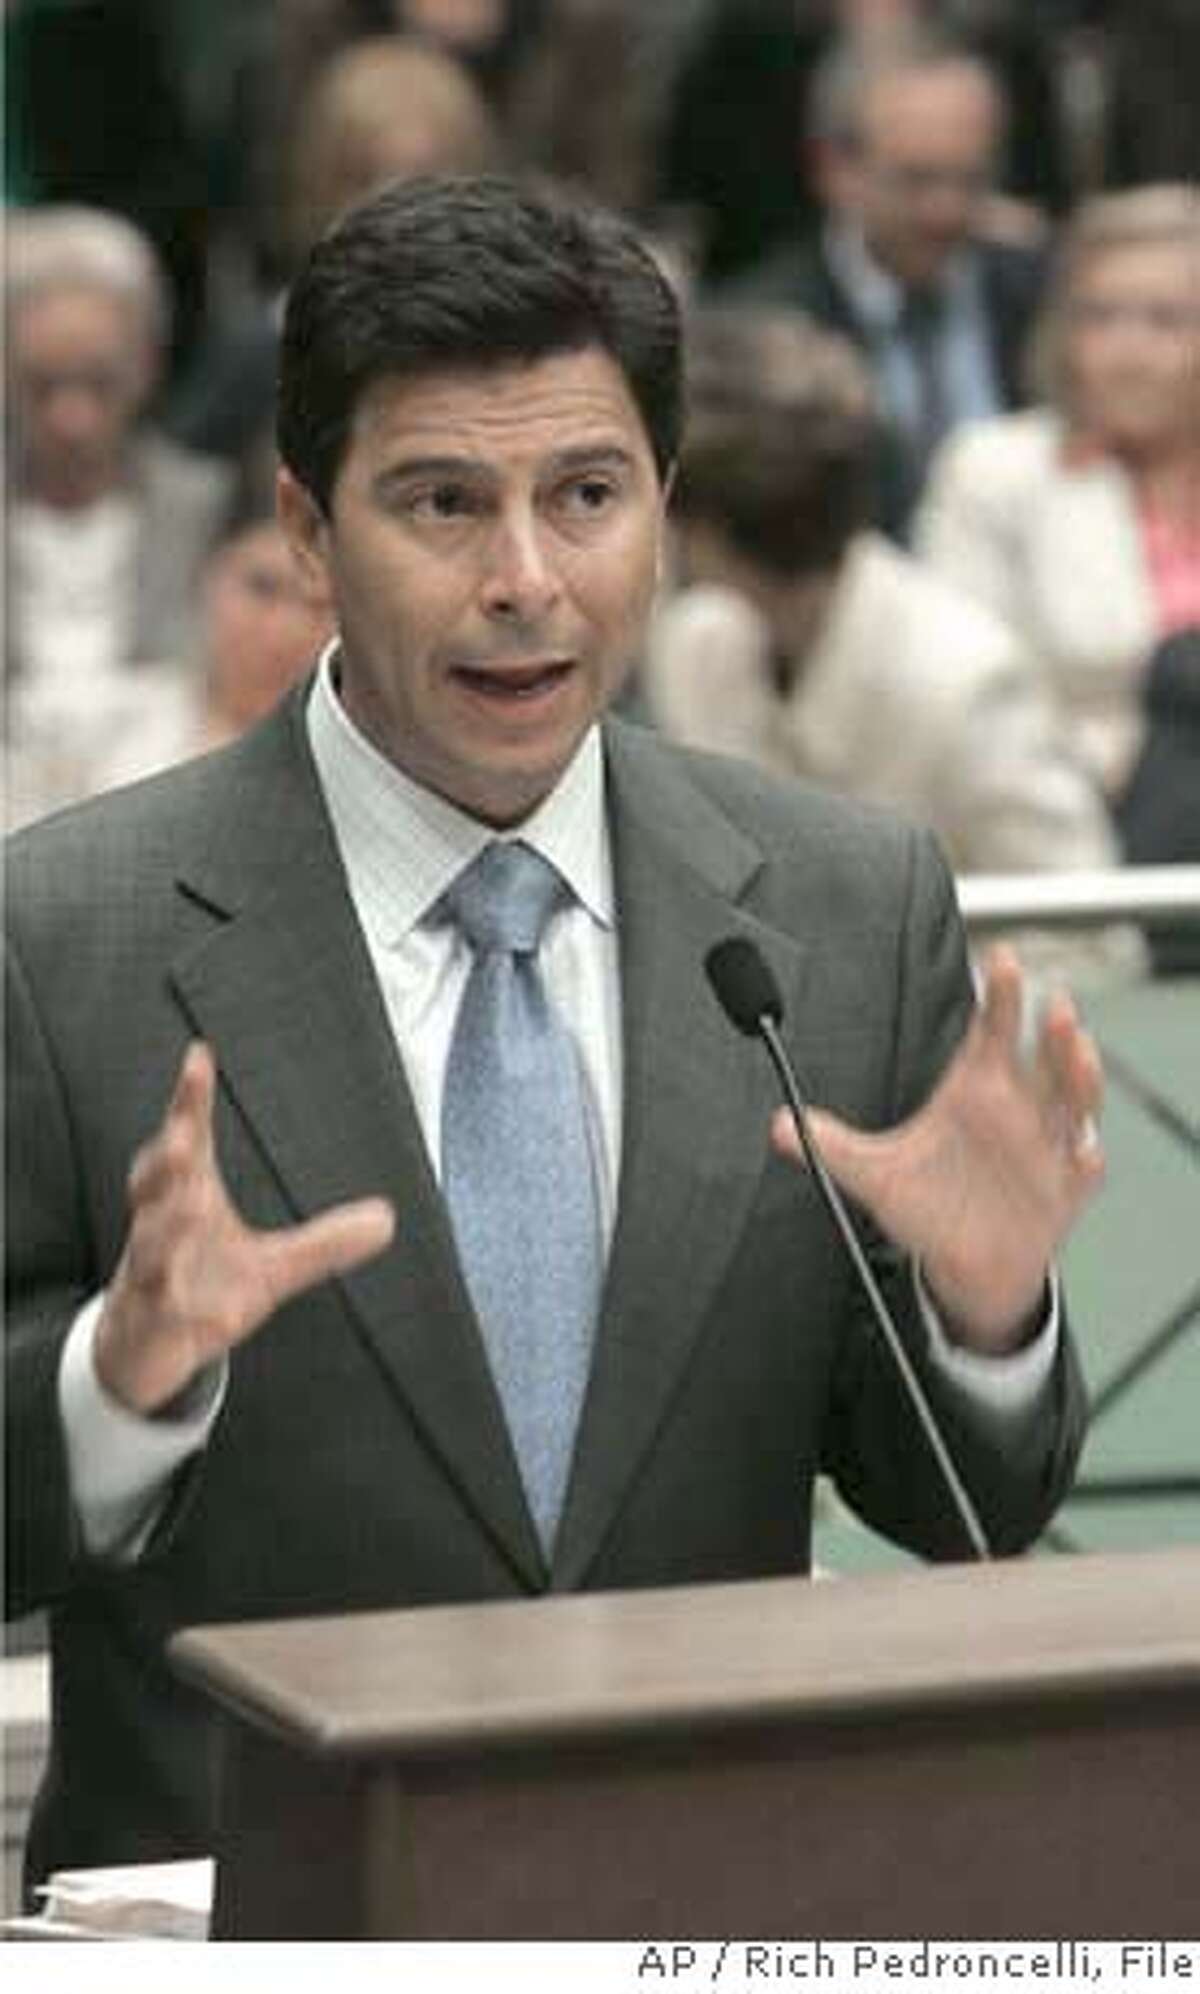 Assembly Speaker Fabian Nunez, D-Los Angeles, gestures as he discusses health care reform before the Assembly Health Committee at the Capitol in Sacramento, Calif., Wednesday, Oct. 31, 2007. The committee held a special session informational hearing to discuss Gov. Arnold Schwarzenegger's revised health care plan.(AP Photo/Rich Pedroncelli) Ran on: 11-09-2007 Ran on: 11-09-2007